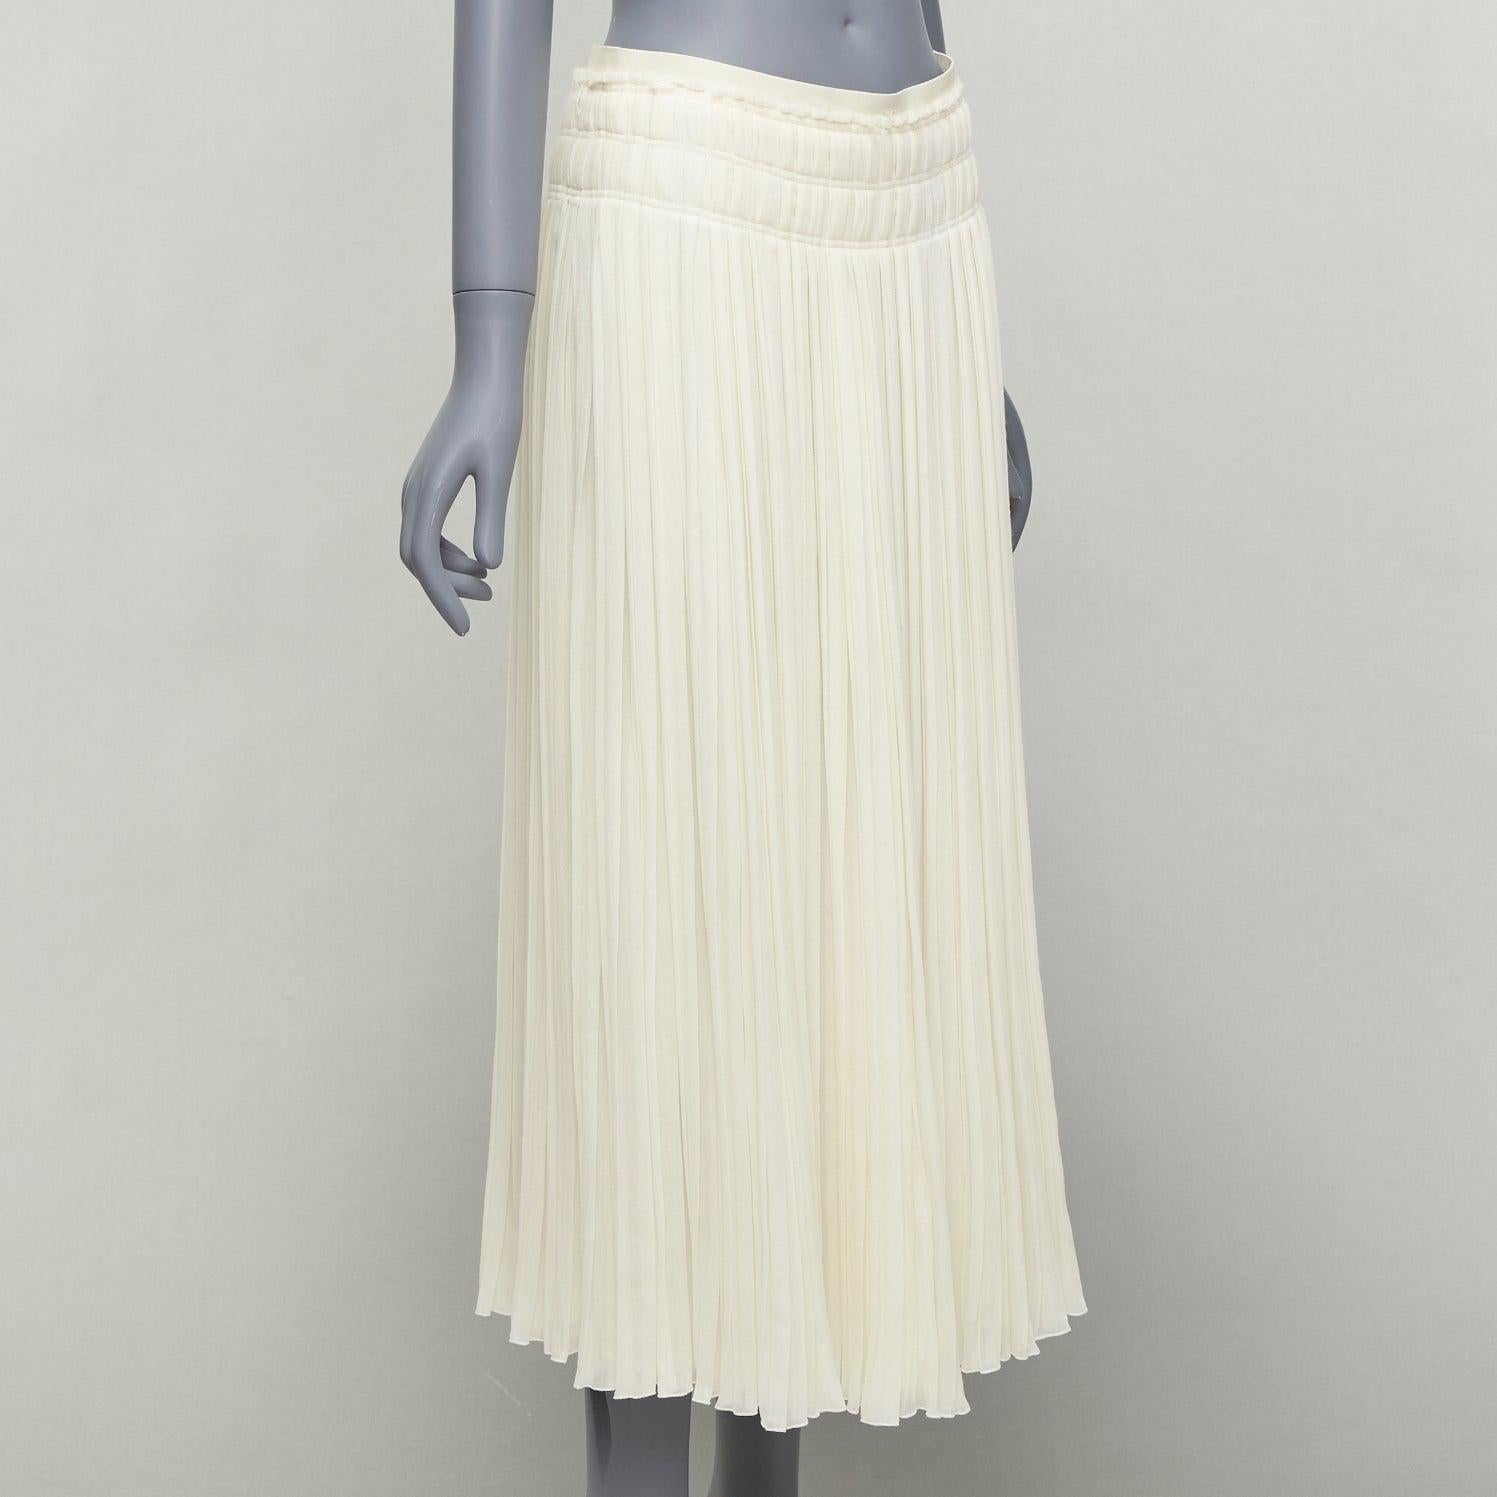 CHLOE 2021 virgin wool soft leather trim mid waist midi pleated skirt
Reference: NKLL/A00043
Brand: Chloe
Collection: 2021
Material: Virgin Wool, Leather
Color: Cream
Pattern: Solid
Closure: Zip
Lining: Cream Fabric
Extra Details: Side zip.
Made in: